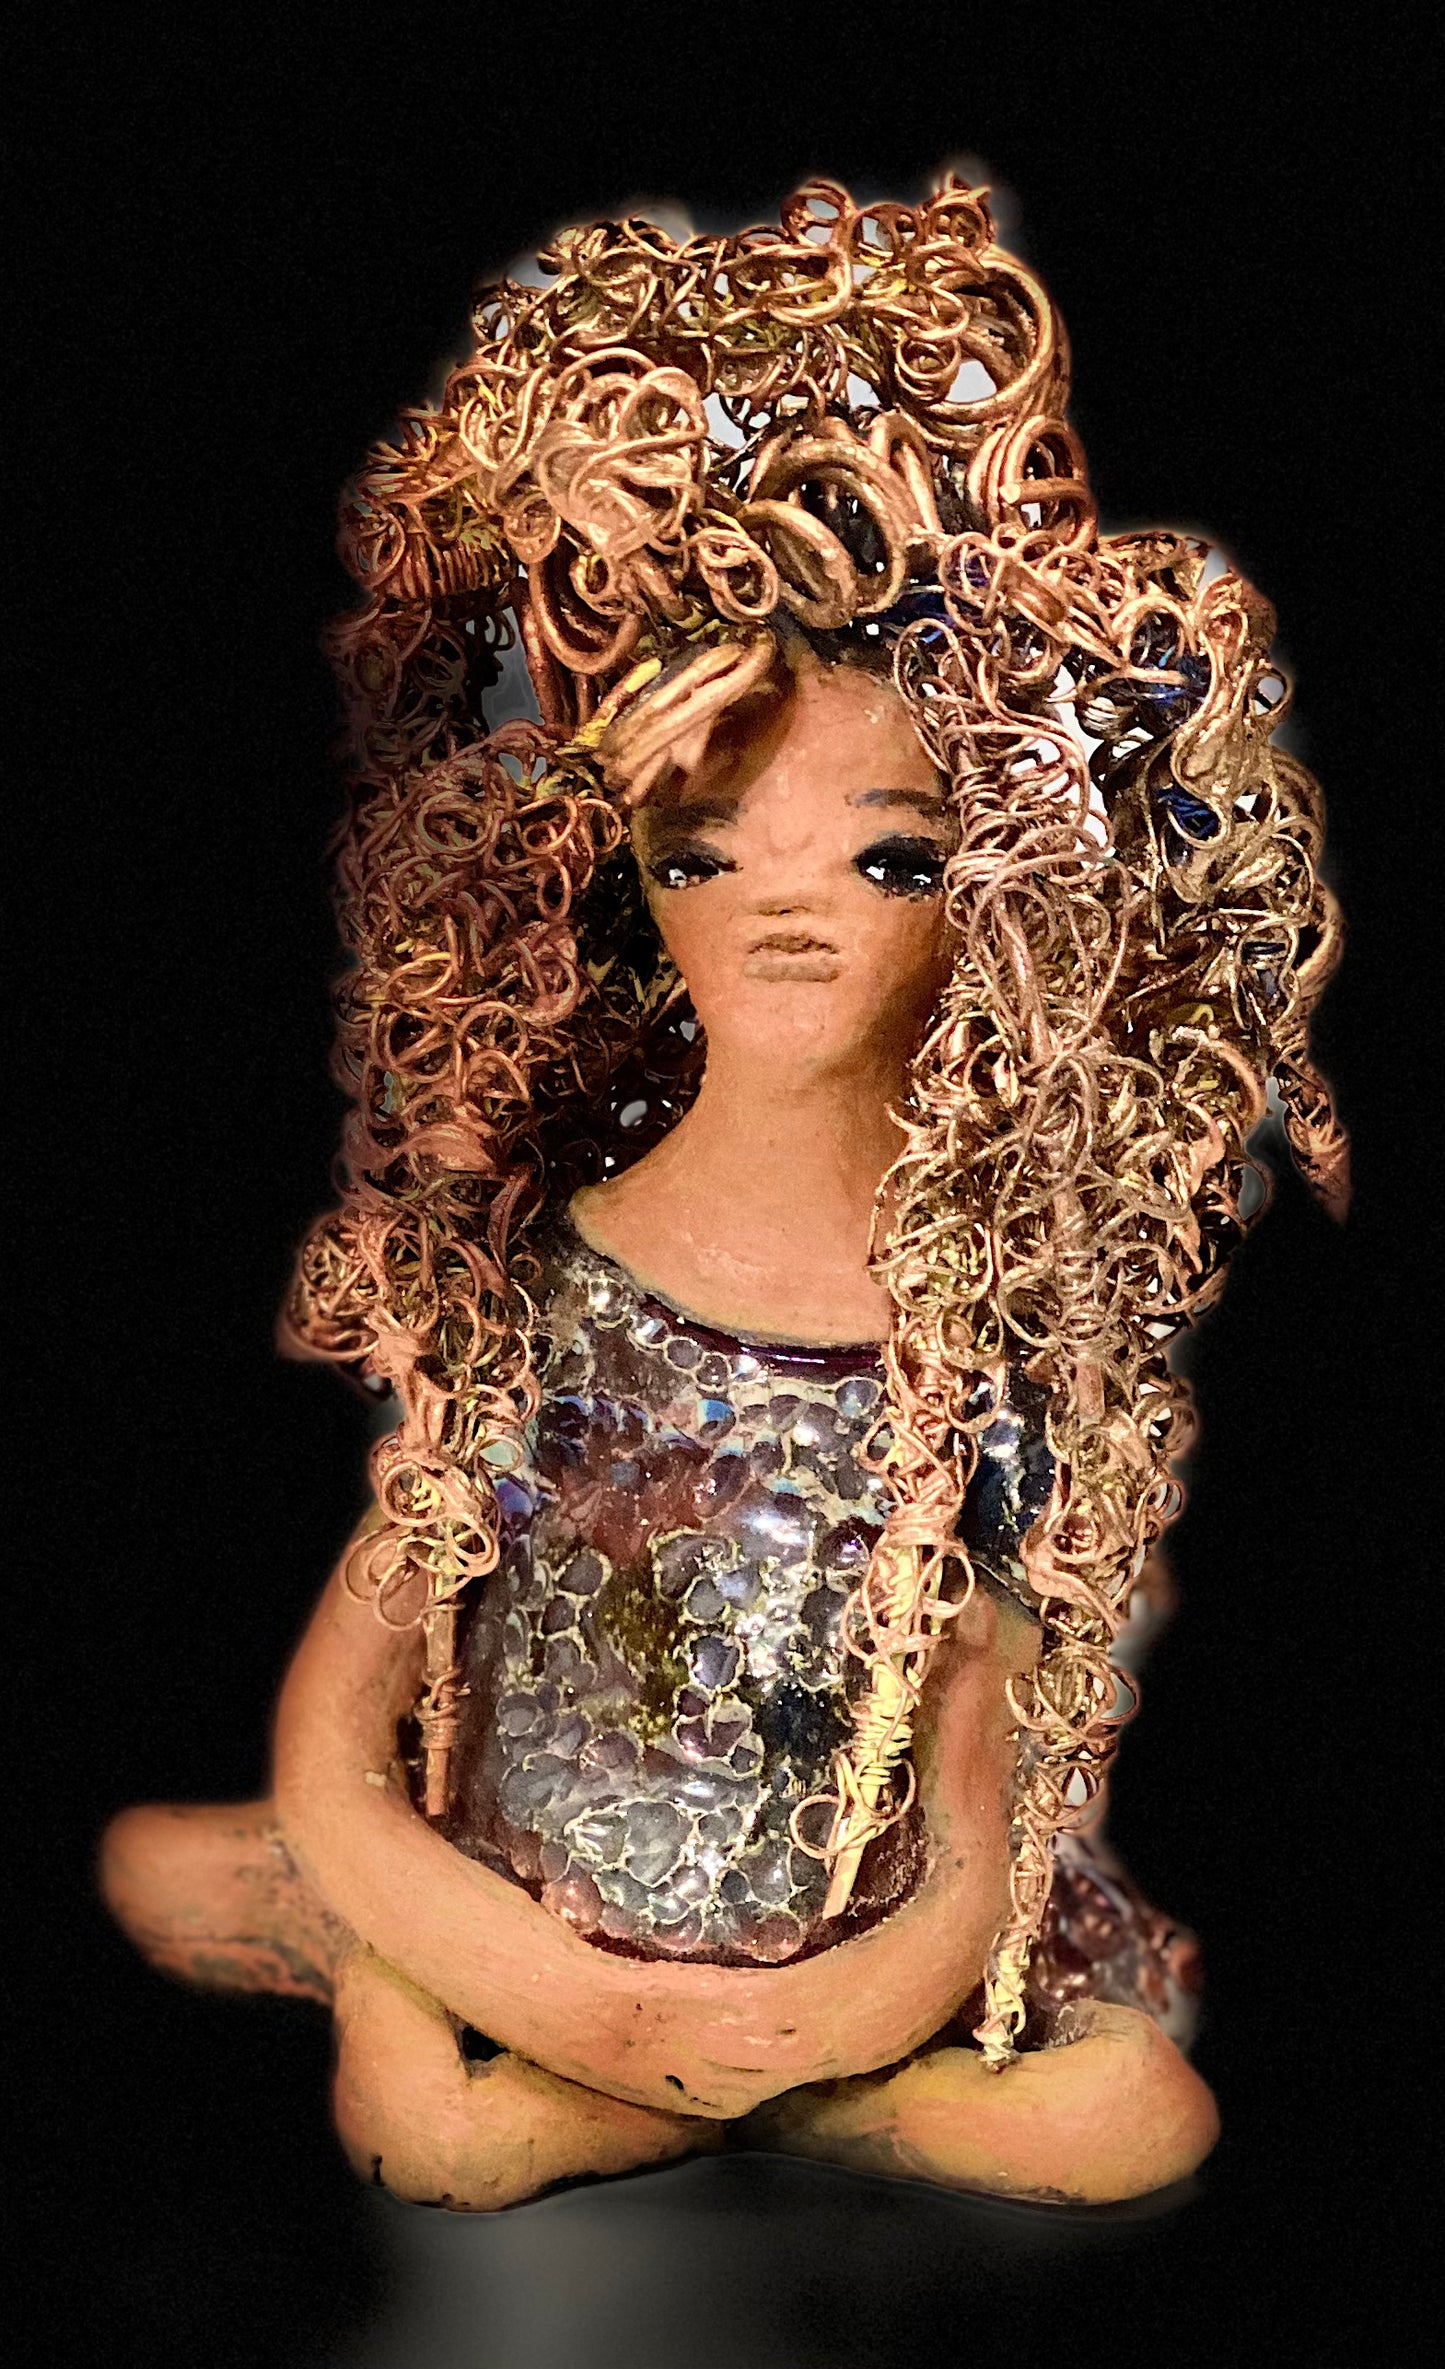 Meet Tiana! Tiana stands 5" x 3.5" x 3.5" and weighs 10 ozs. She has a lovely honey brown complexion. Tiana's dress is  metallic copper. She has her long loving arms resting at her side. " I am really pleased  with Tiana's blue beaded necklace and her new wire hair Find a place in your space for Tiana!